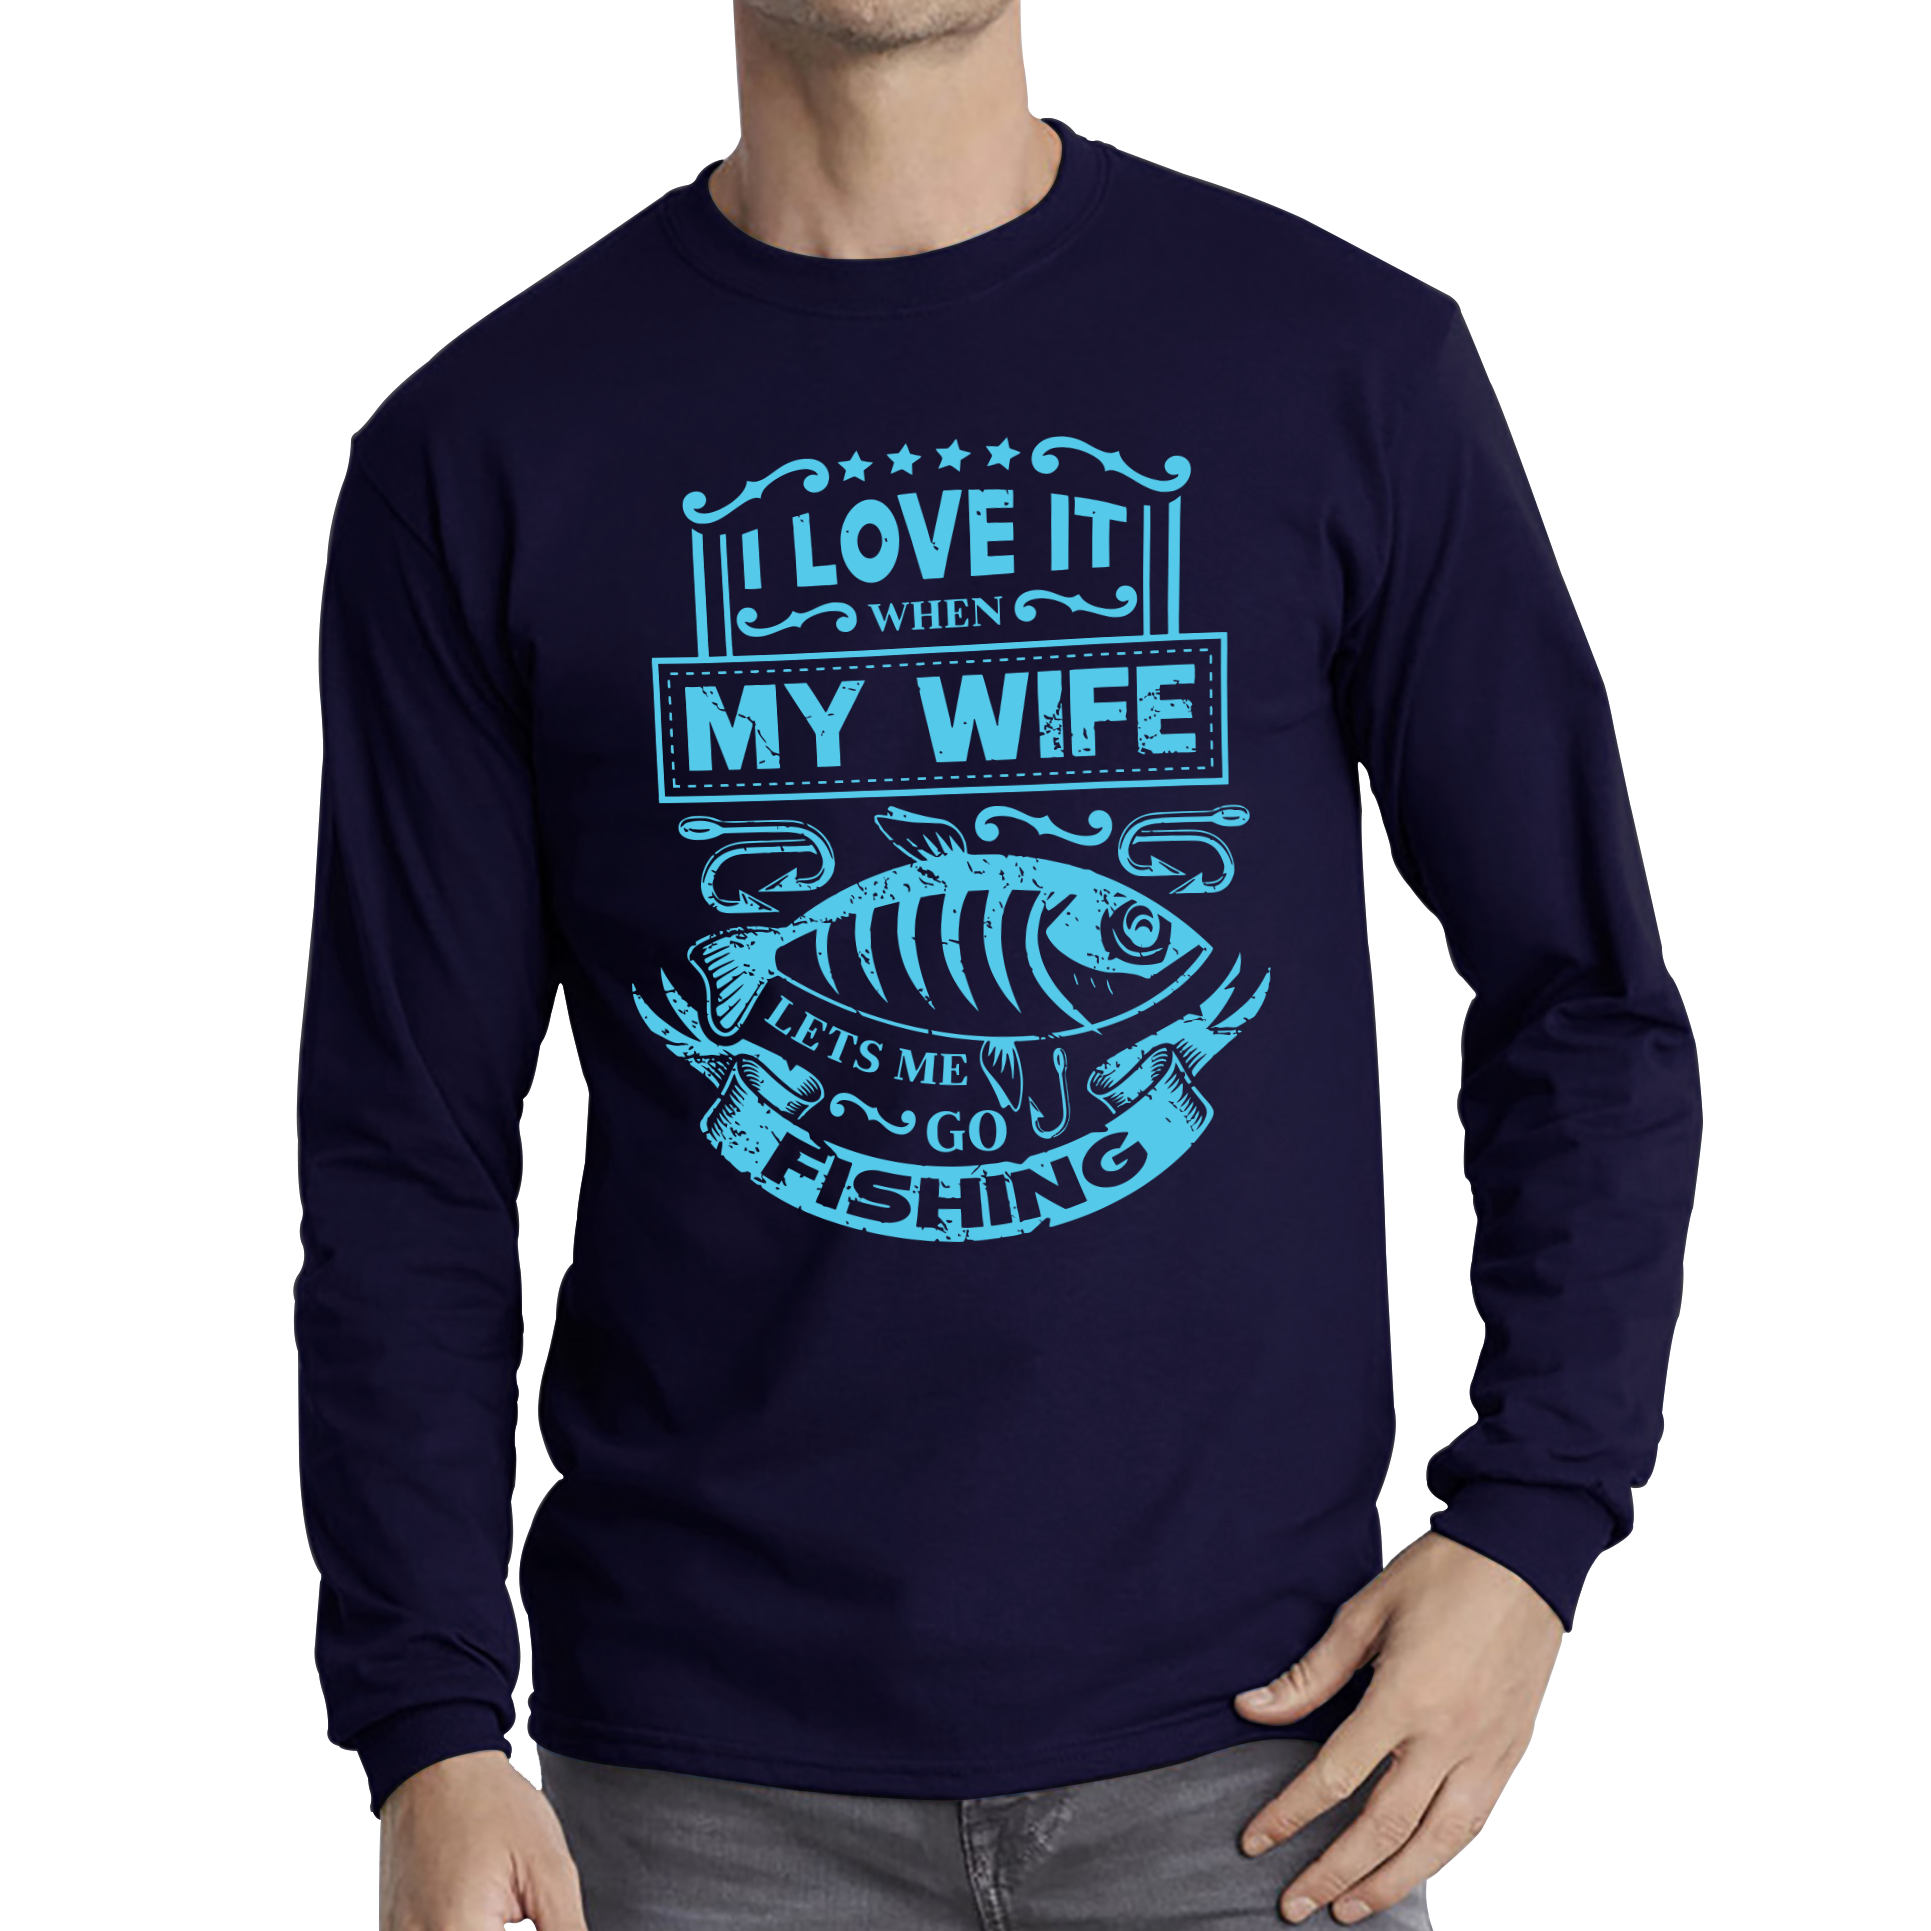 Funny I Love It When My Wife Lets Me Go Fishing Adult Long Sleeve T Shirt